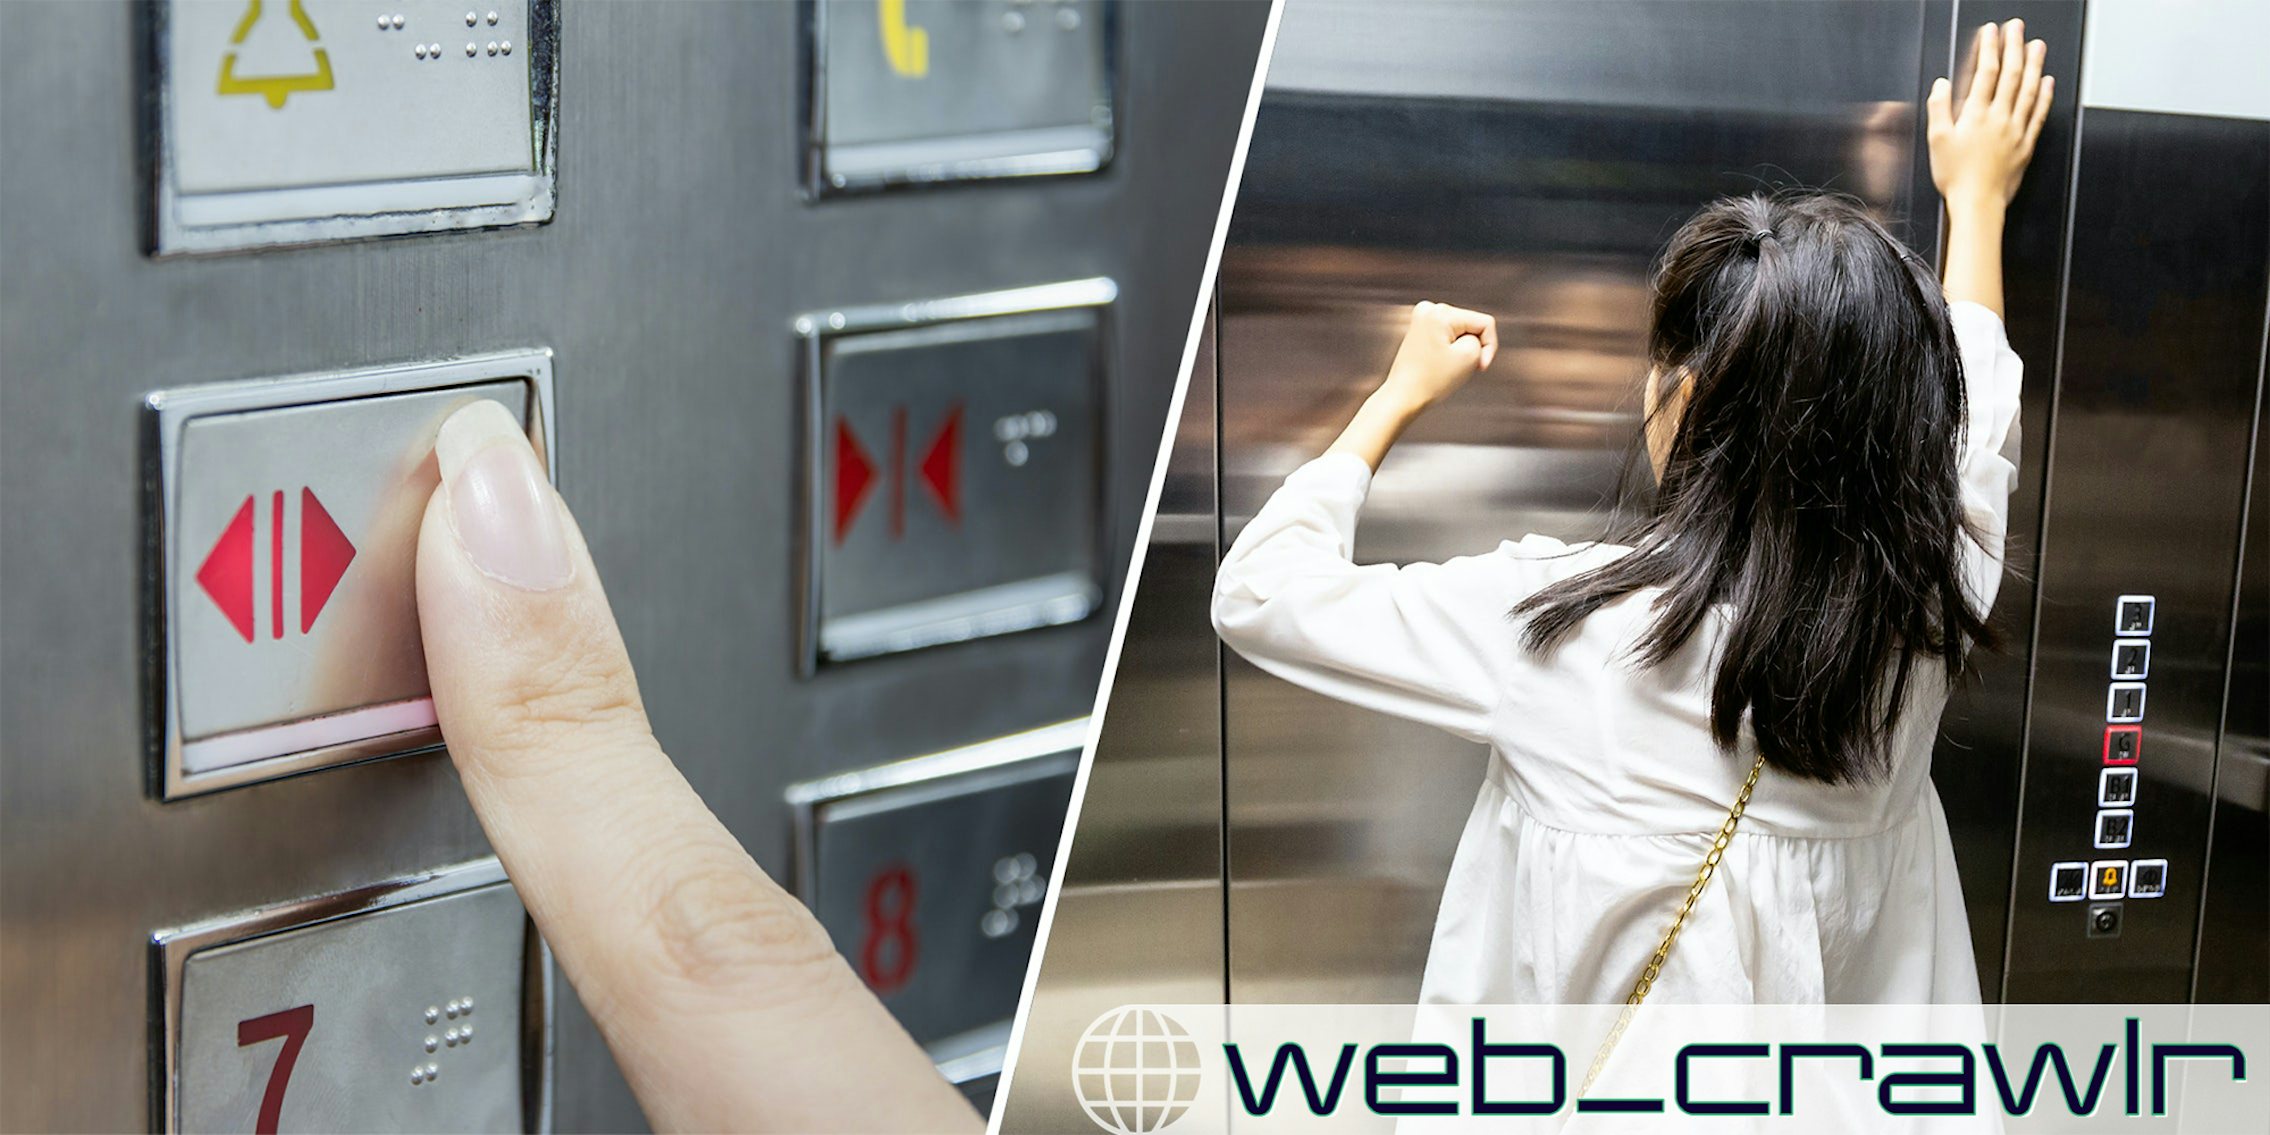 Pressing Elevator Button; girl is stuck in an elevator